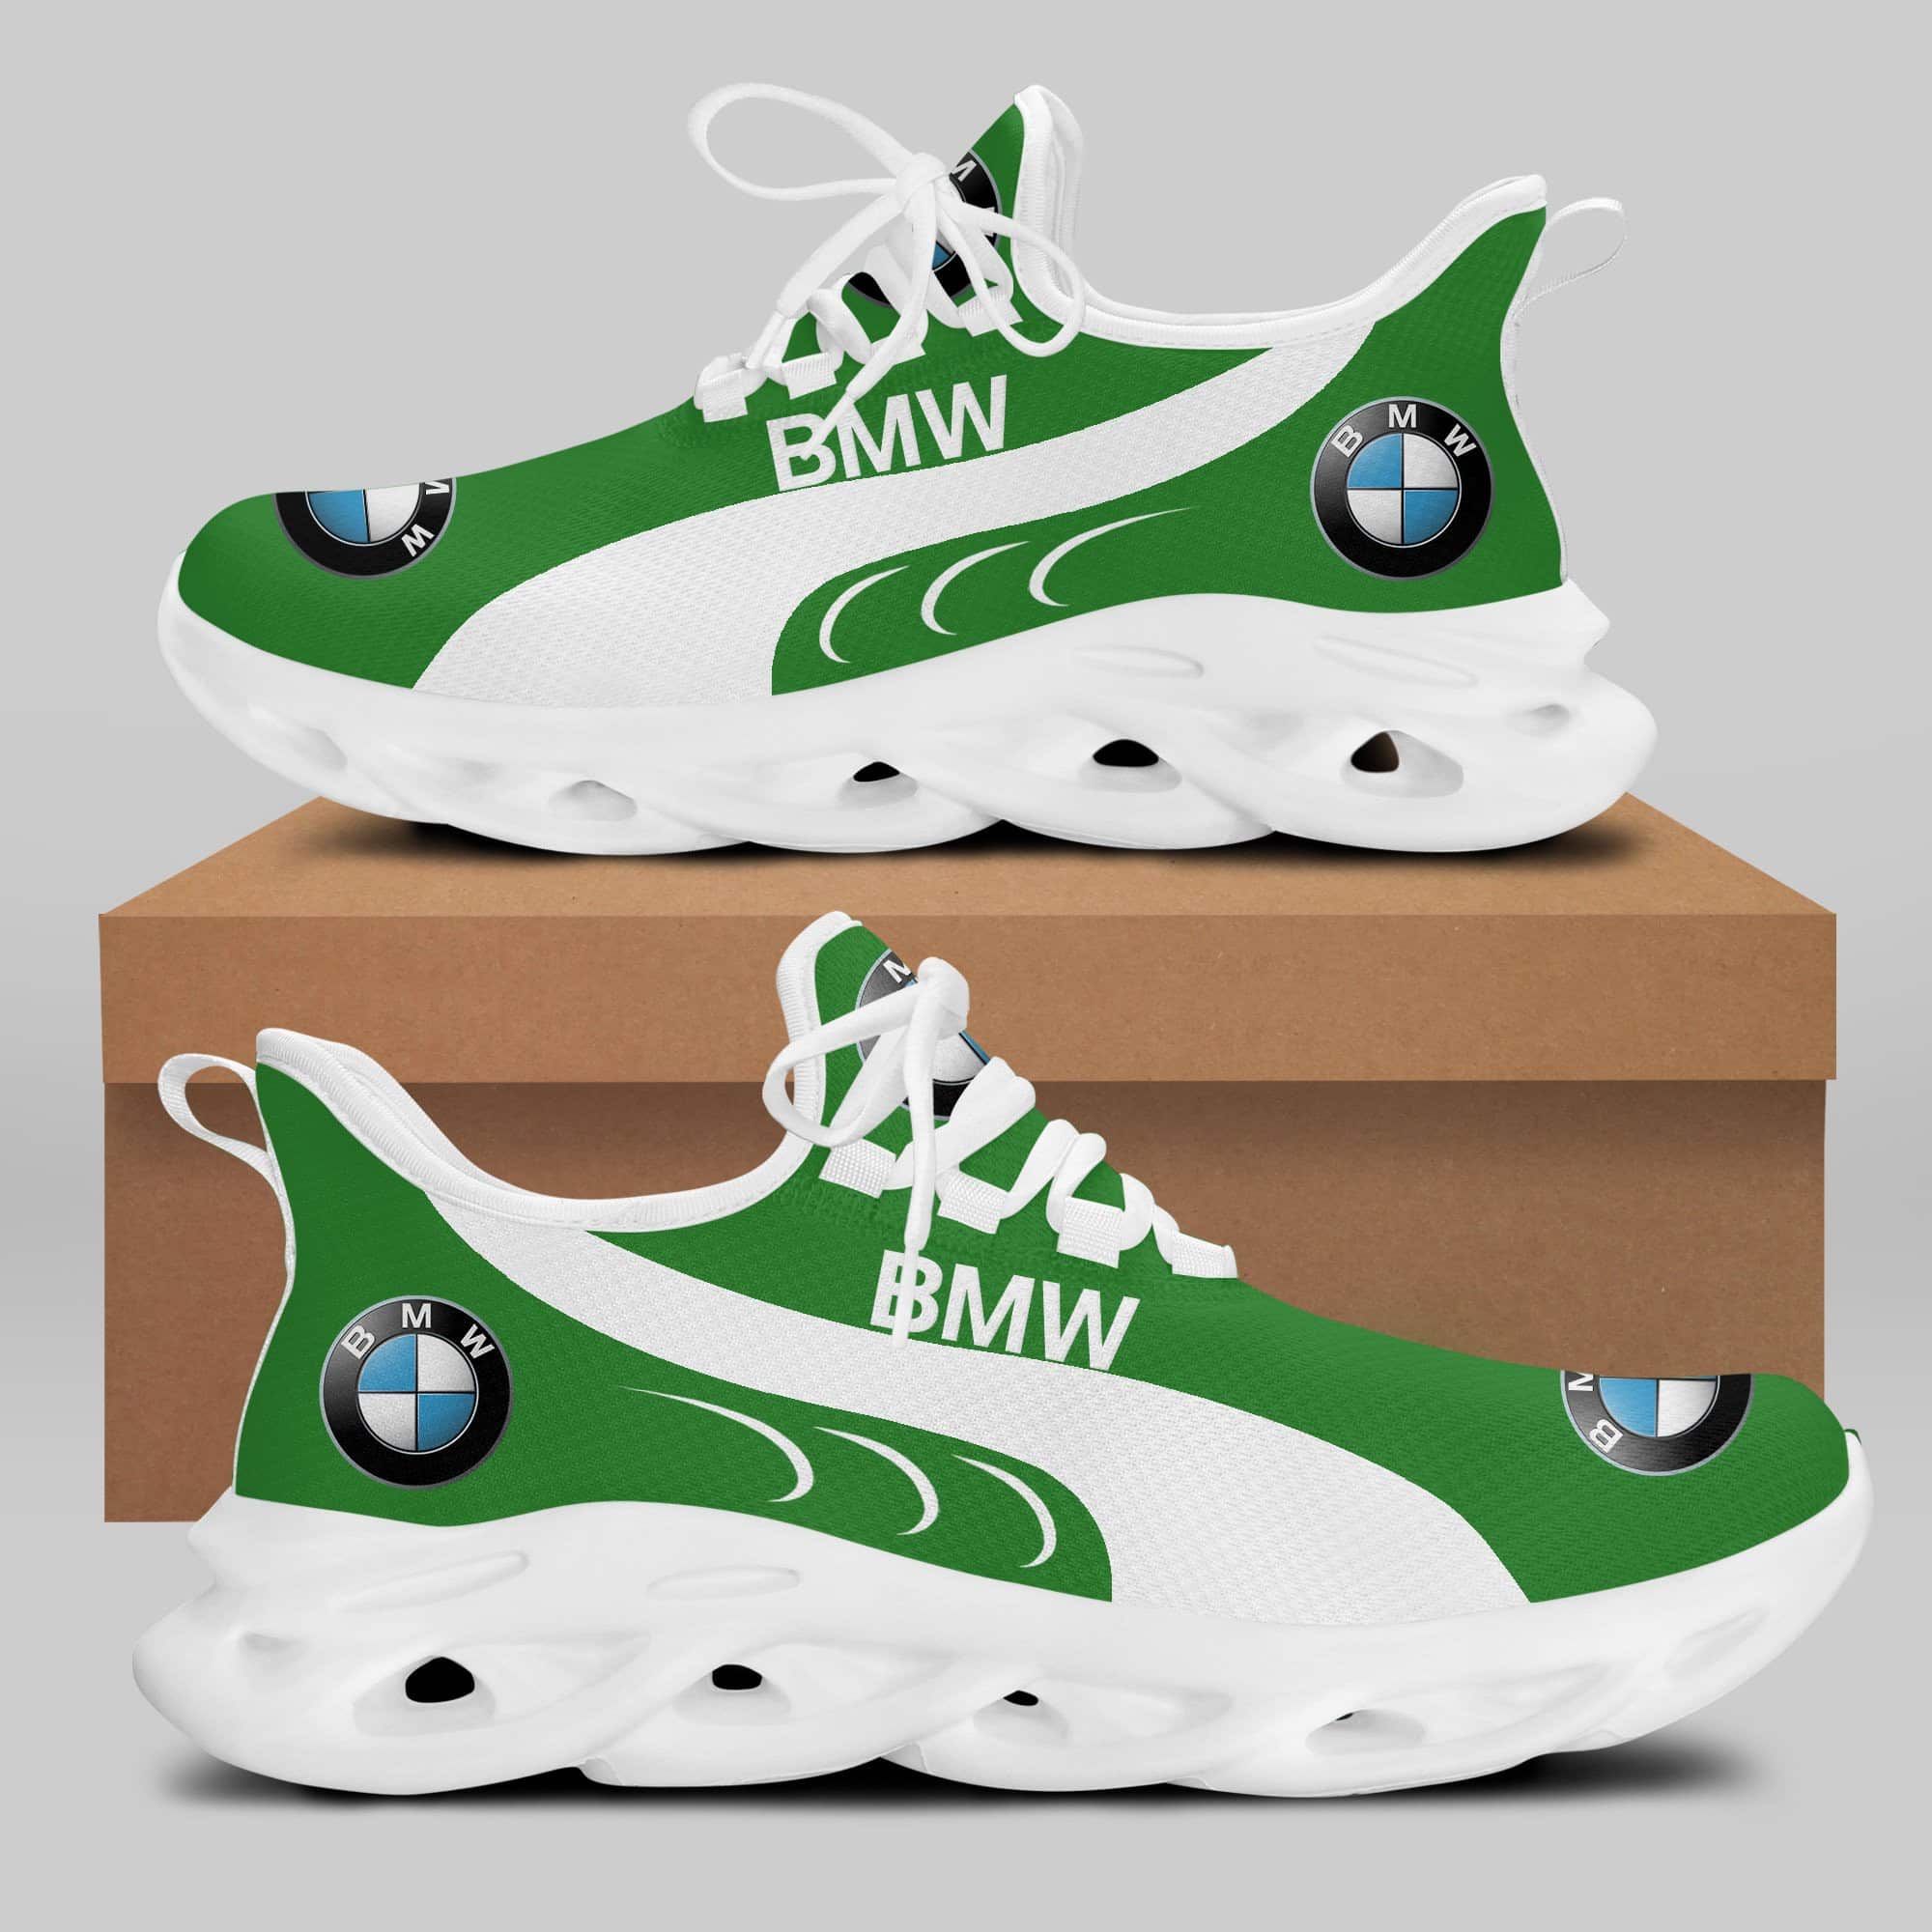 Bmw Running Shoes Max Soul Shoes Sneakers Ver 54 1